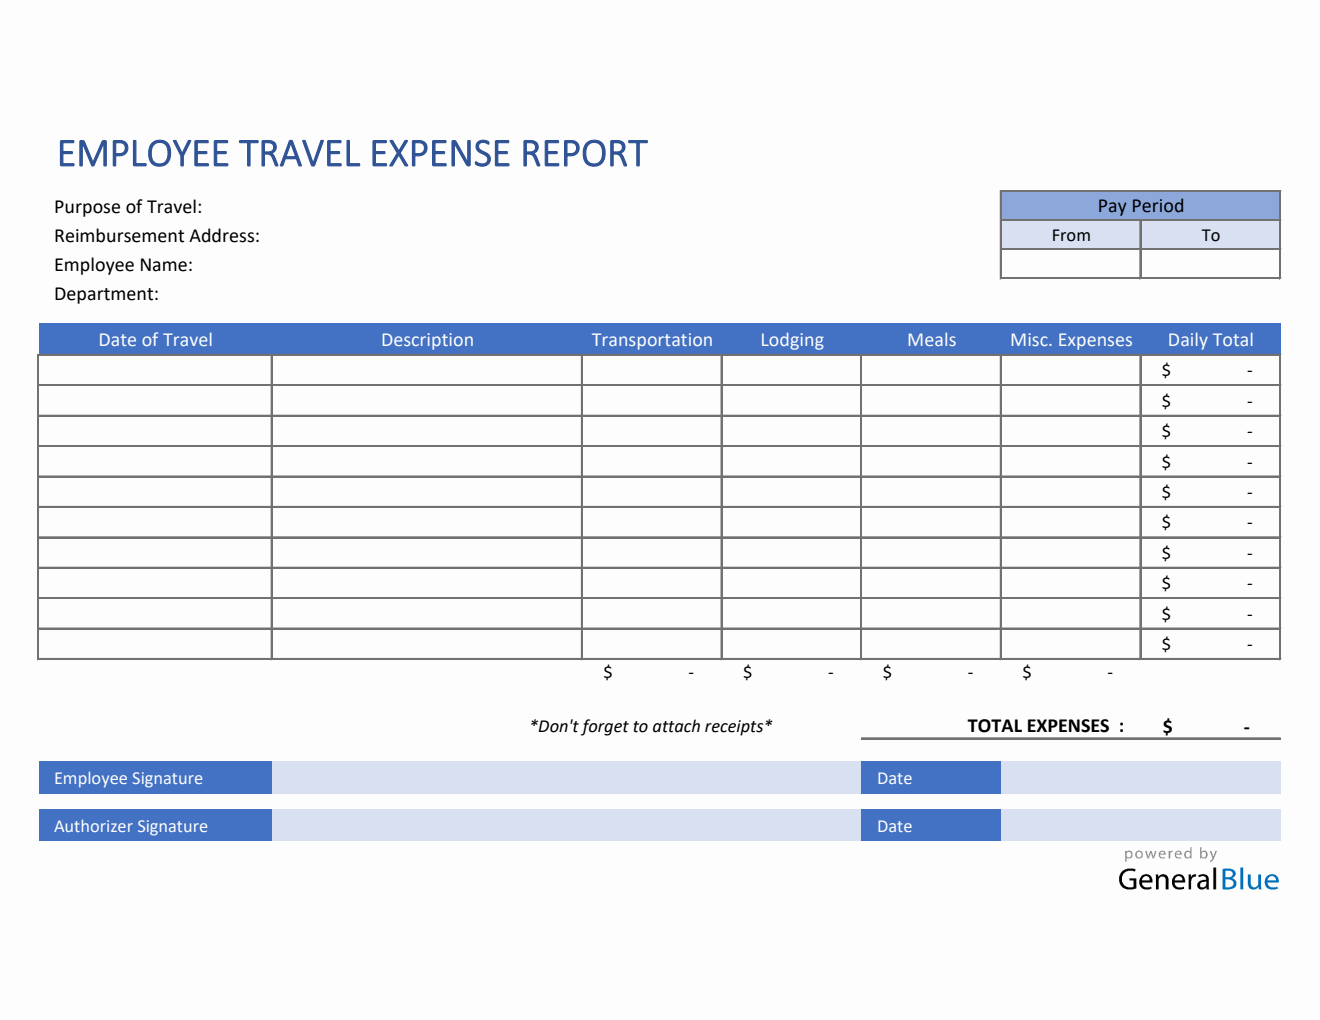 Employee Travel Expense Report Template in Excel With Per Diem Expense Report Template